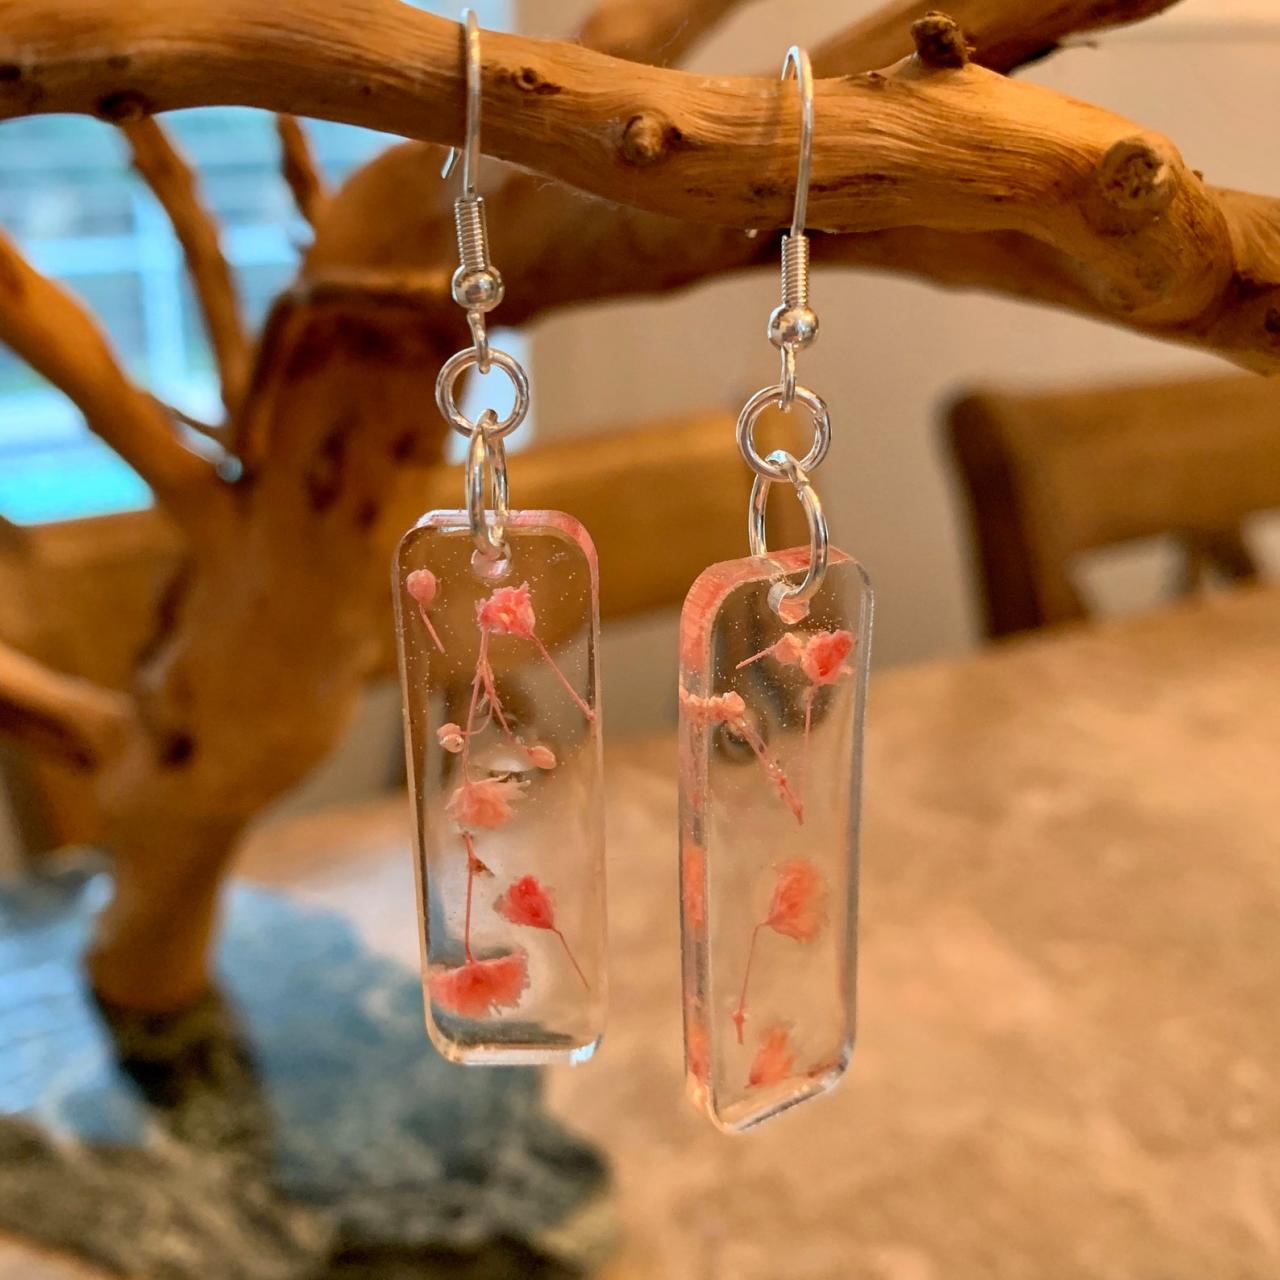 Pressed Flowers Earrings, Resin Flower Jewelry, Unique Gift For Grad,preserved Flowers, Boho, Minimalist Jewelry Gifts, Nature Gift, Botanic